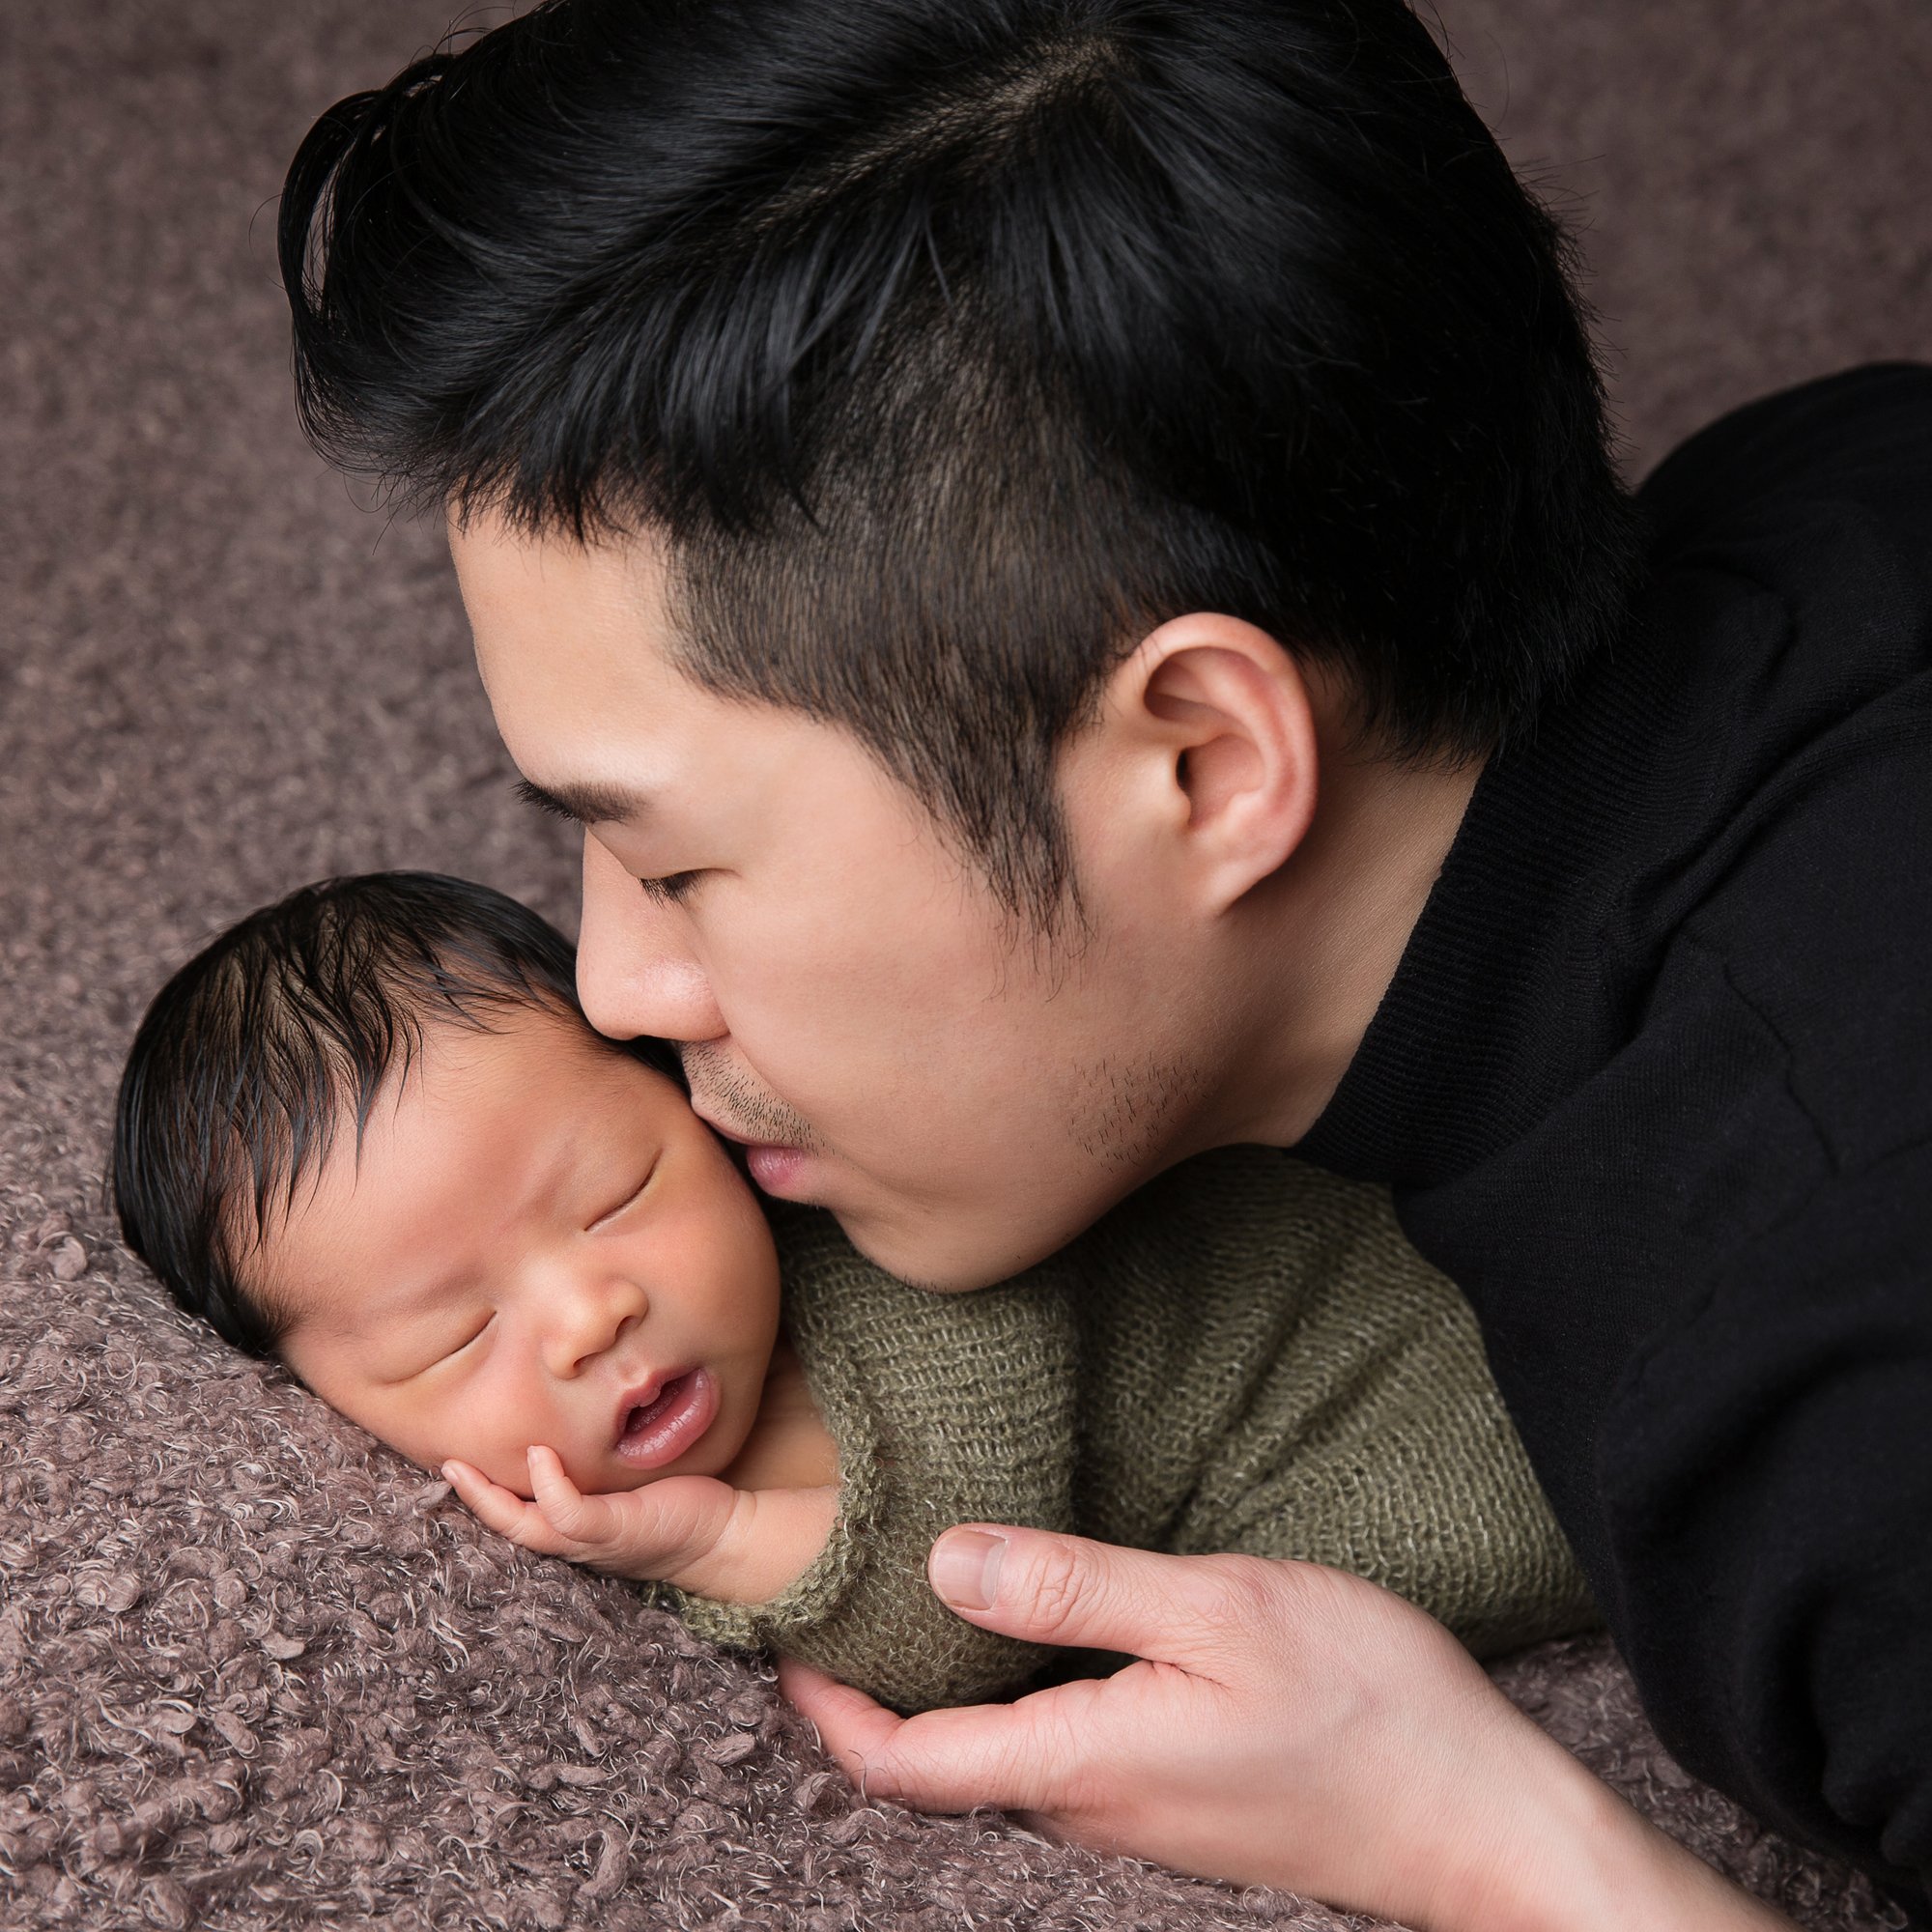 Newborn photographer who comes to your home in Central London